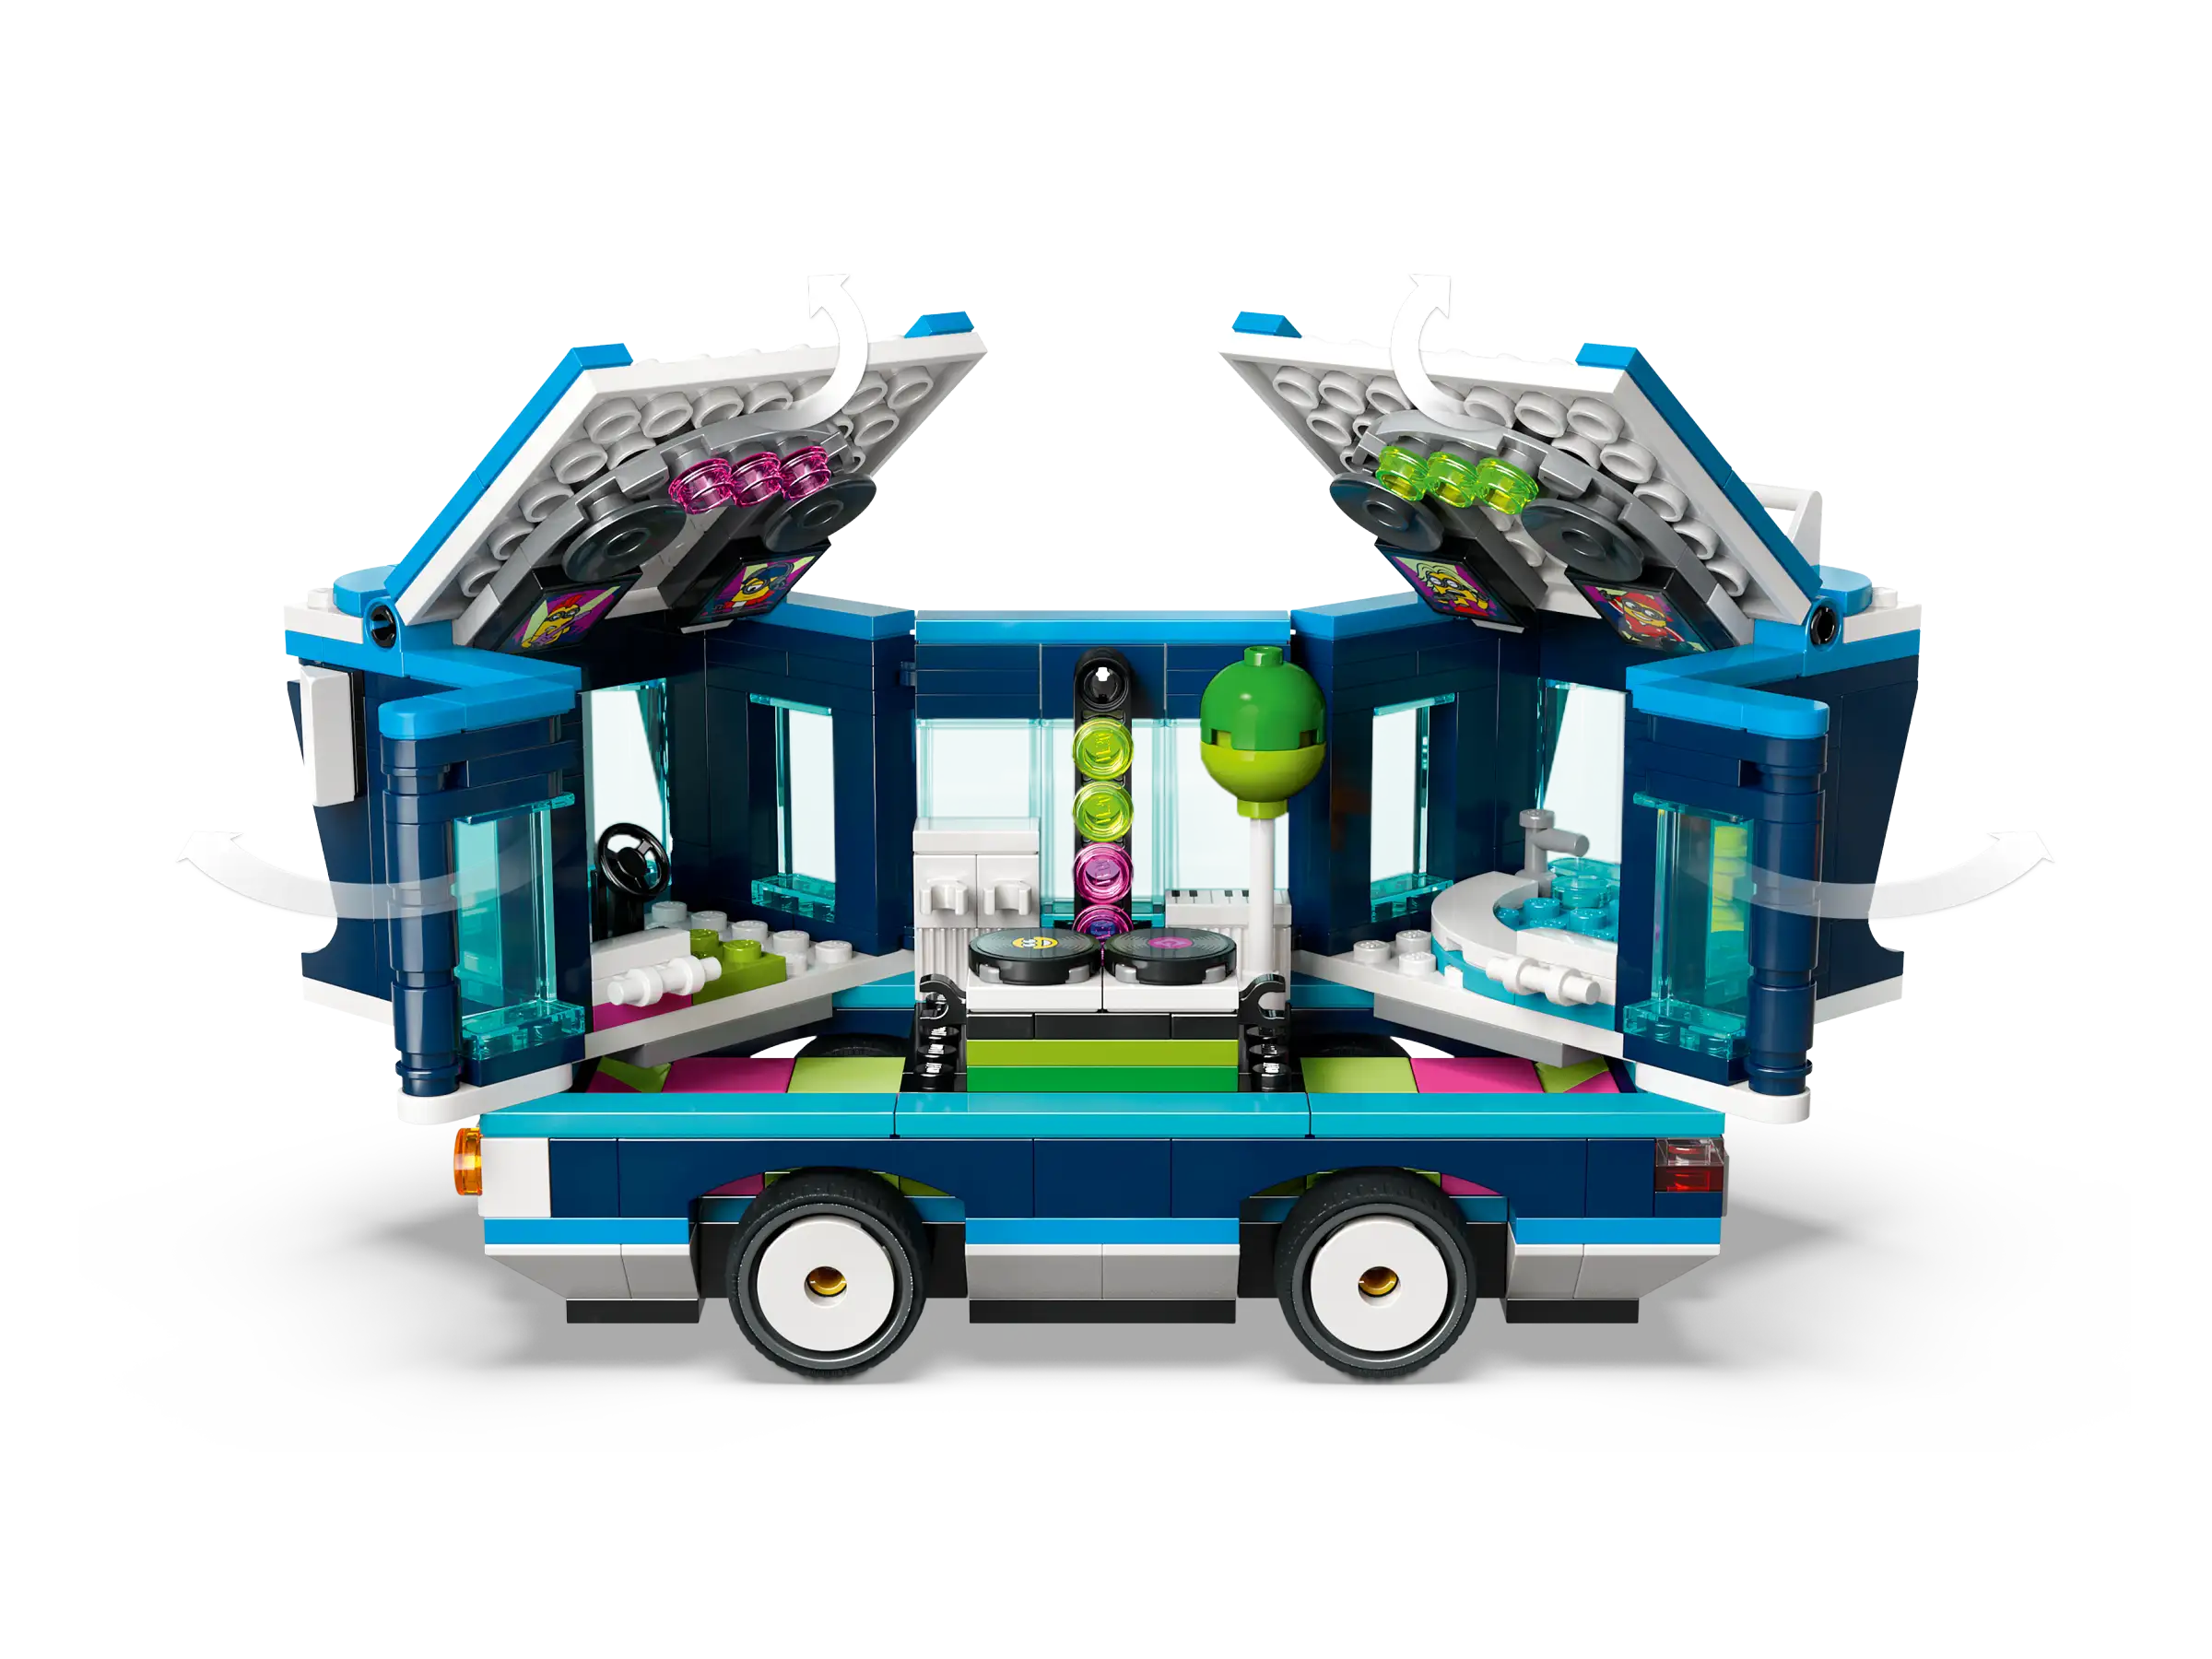 LEGO 75581 Minions' Music Party Bus